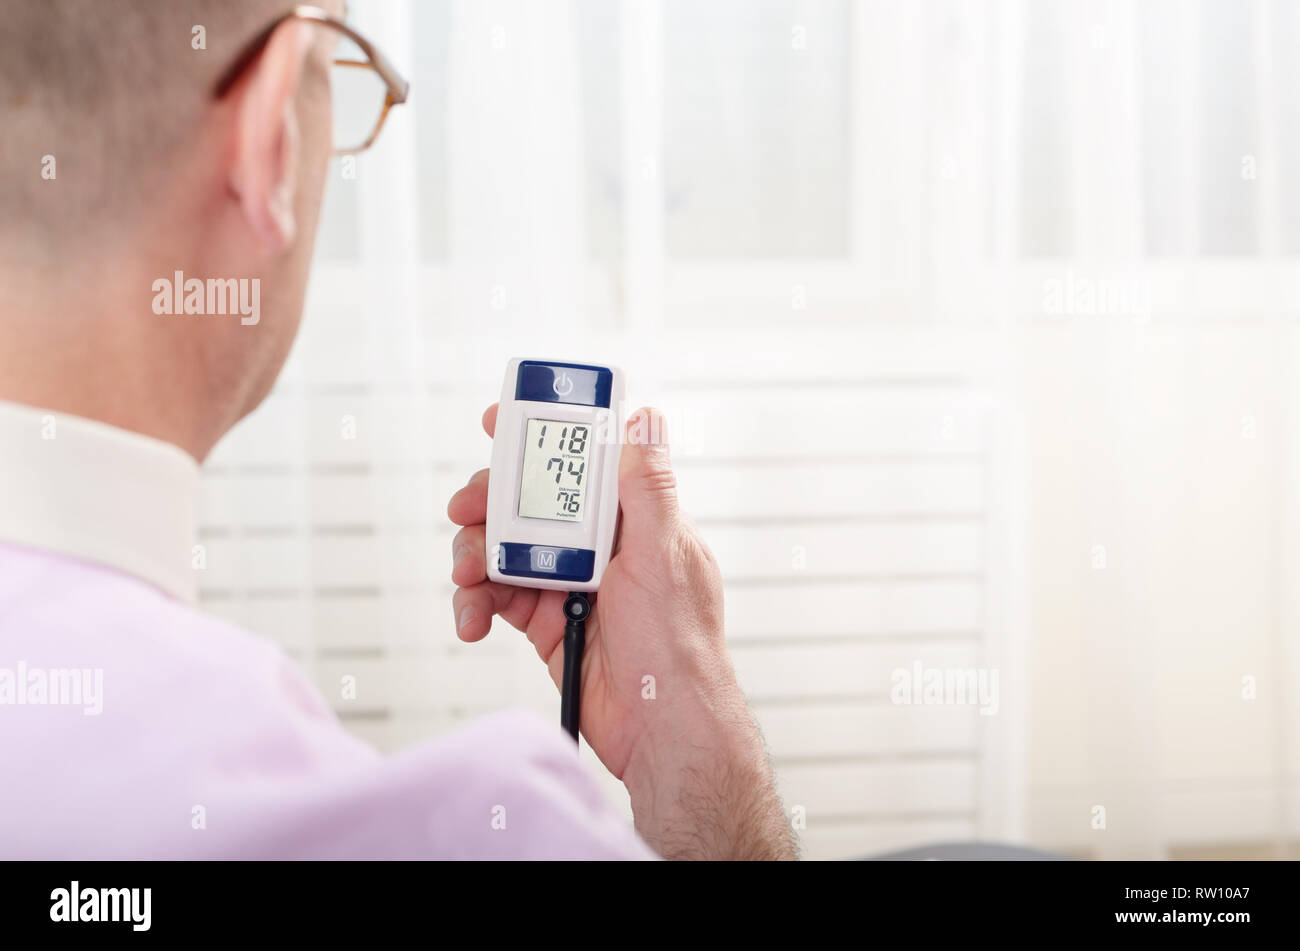 Man read measurement results from personal digital blood pressure monitor Stock Photo